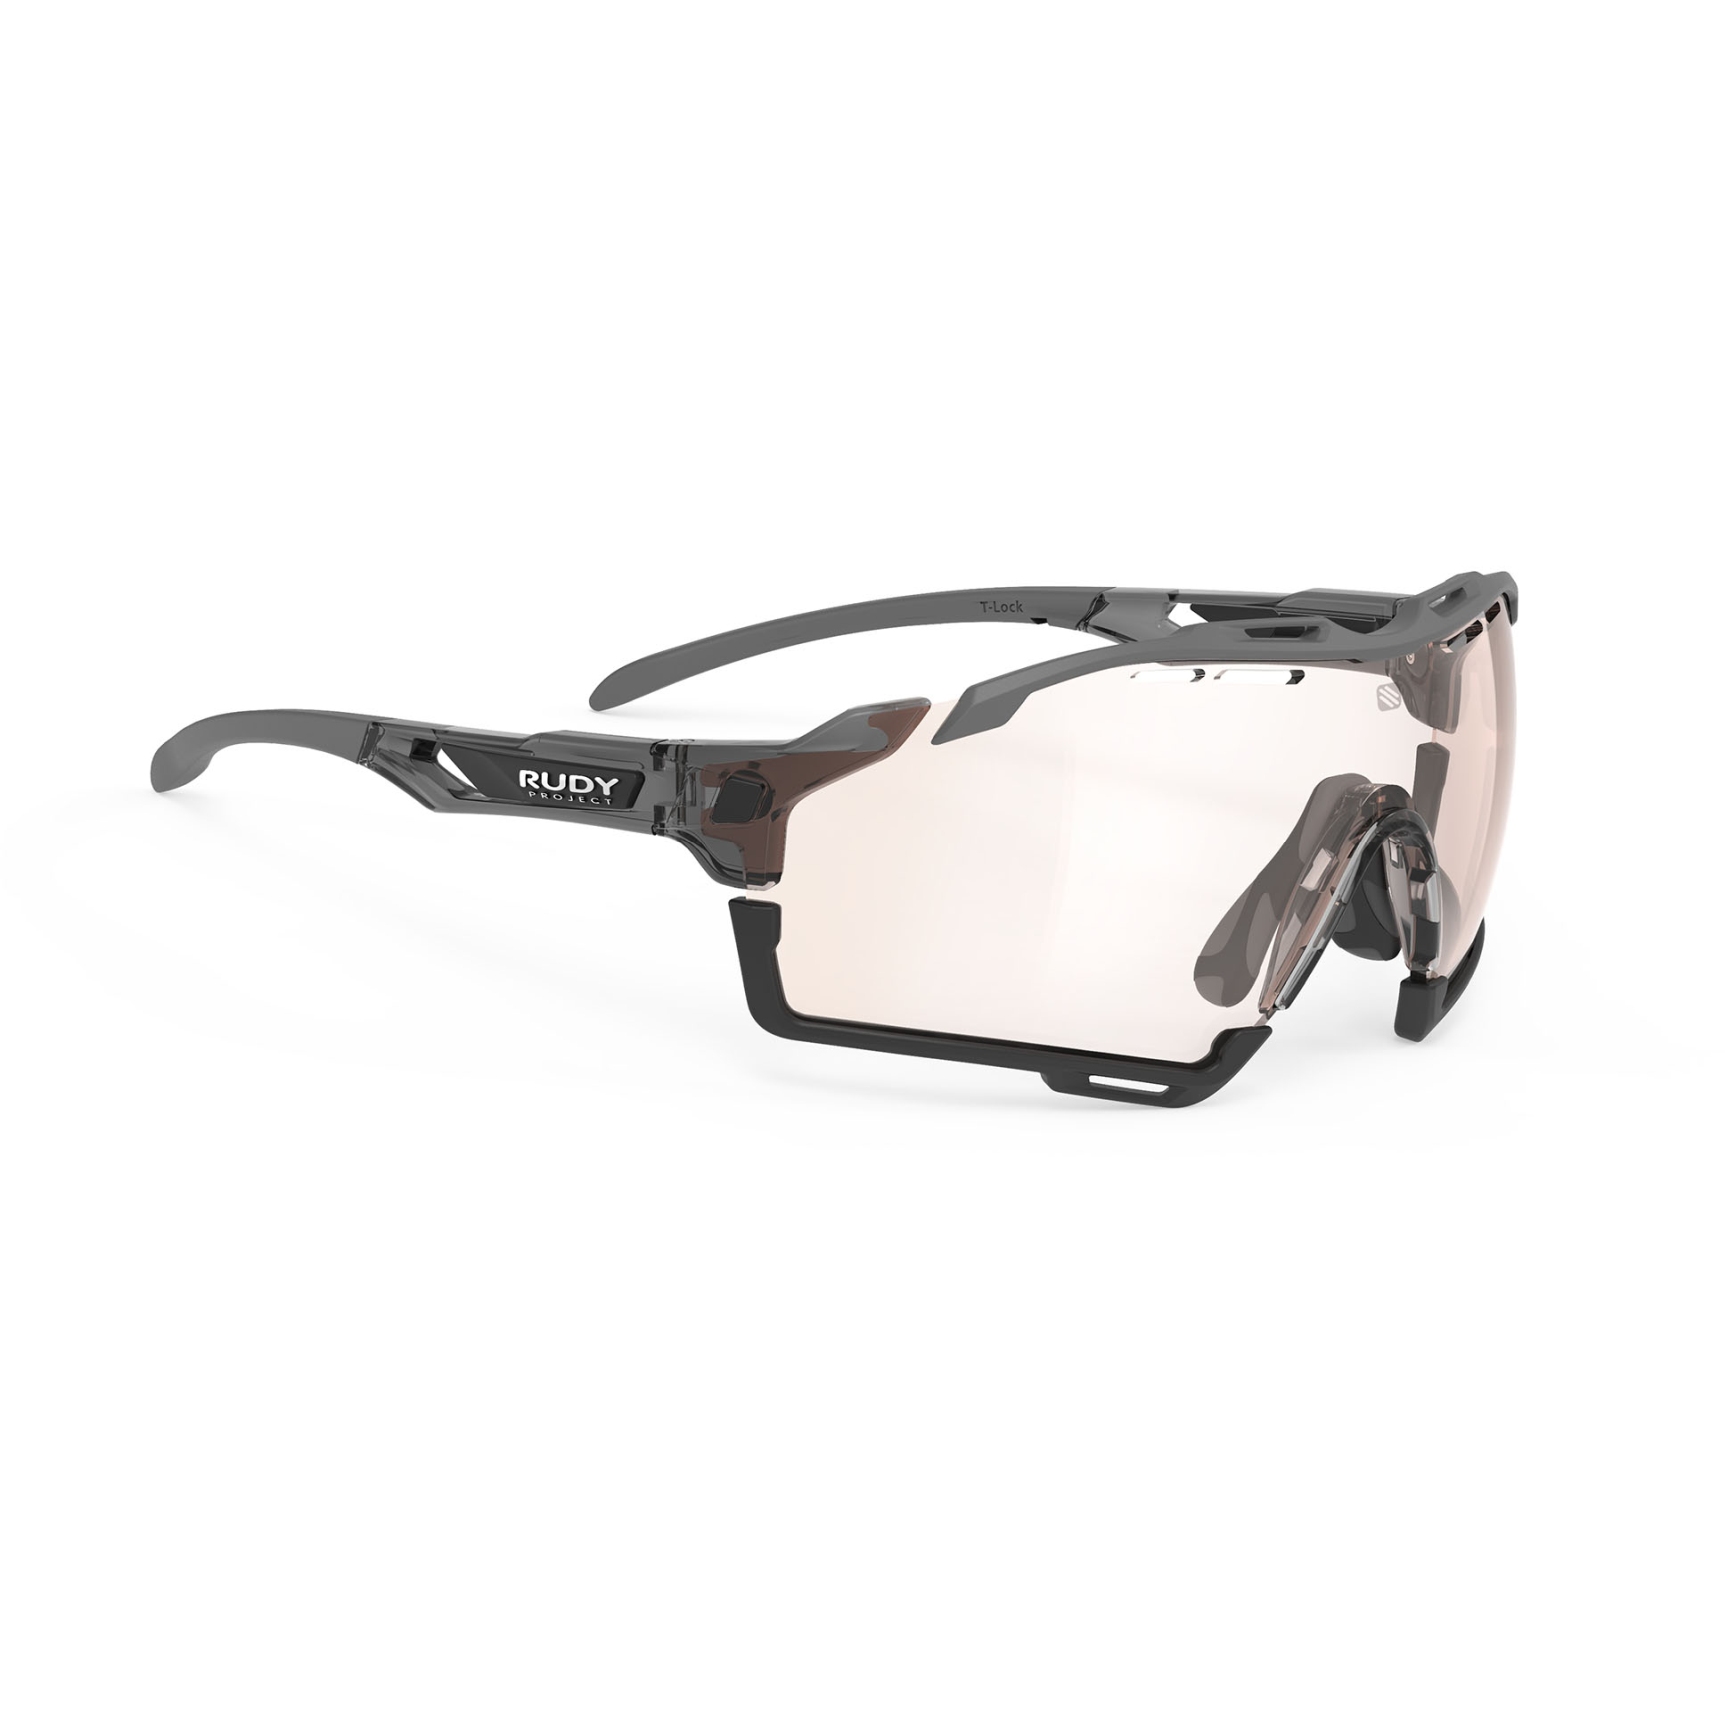 Picture of Rudy Project Cutline Glasses - Photochromic - Crystal Ash / ImpactX 2 Laser Brown